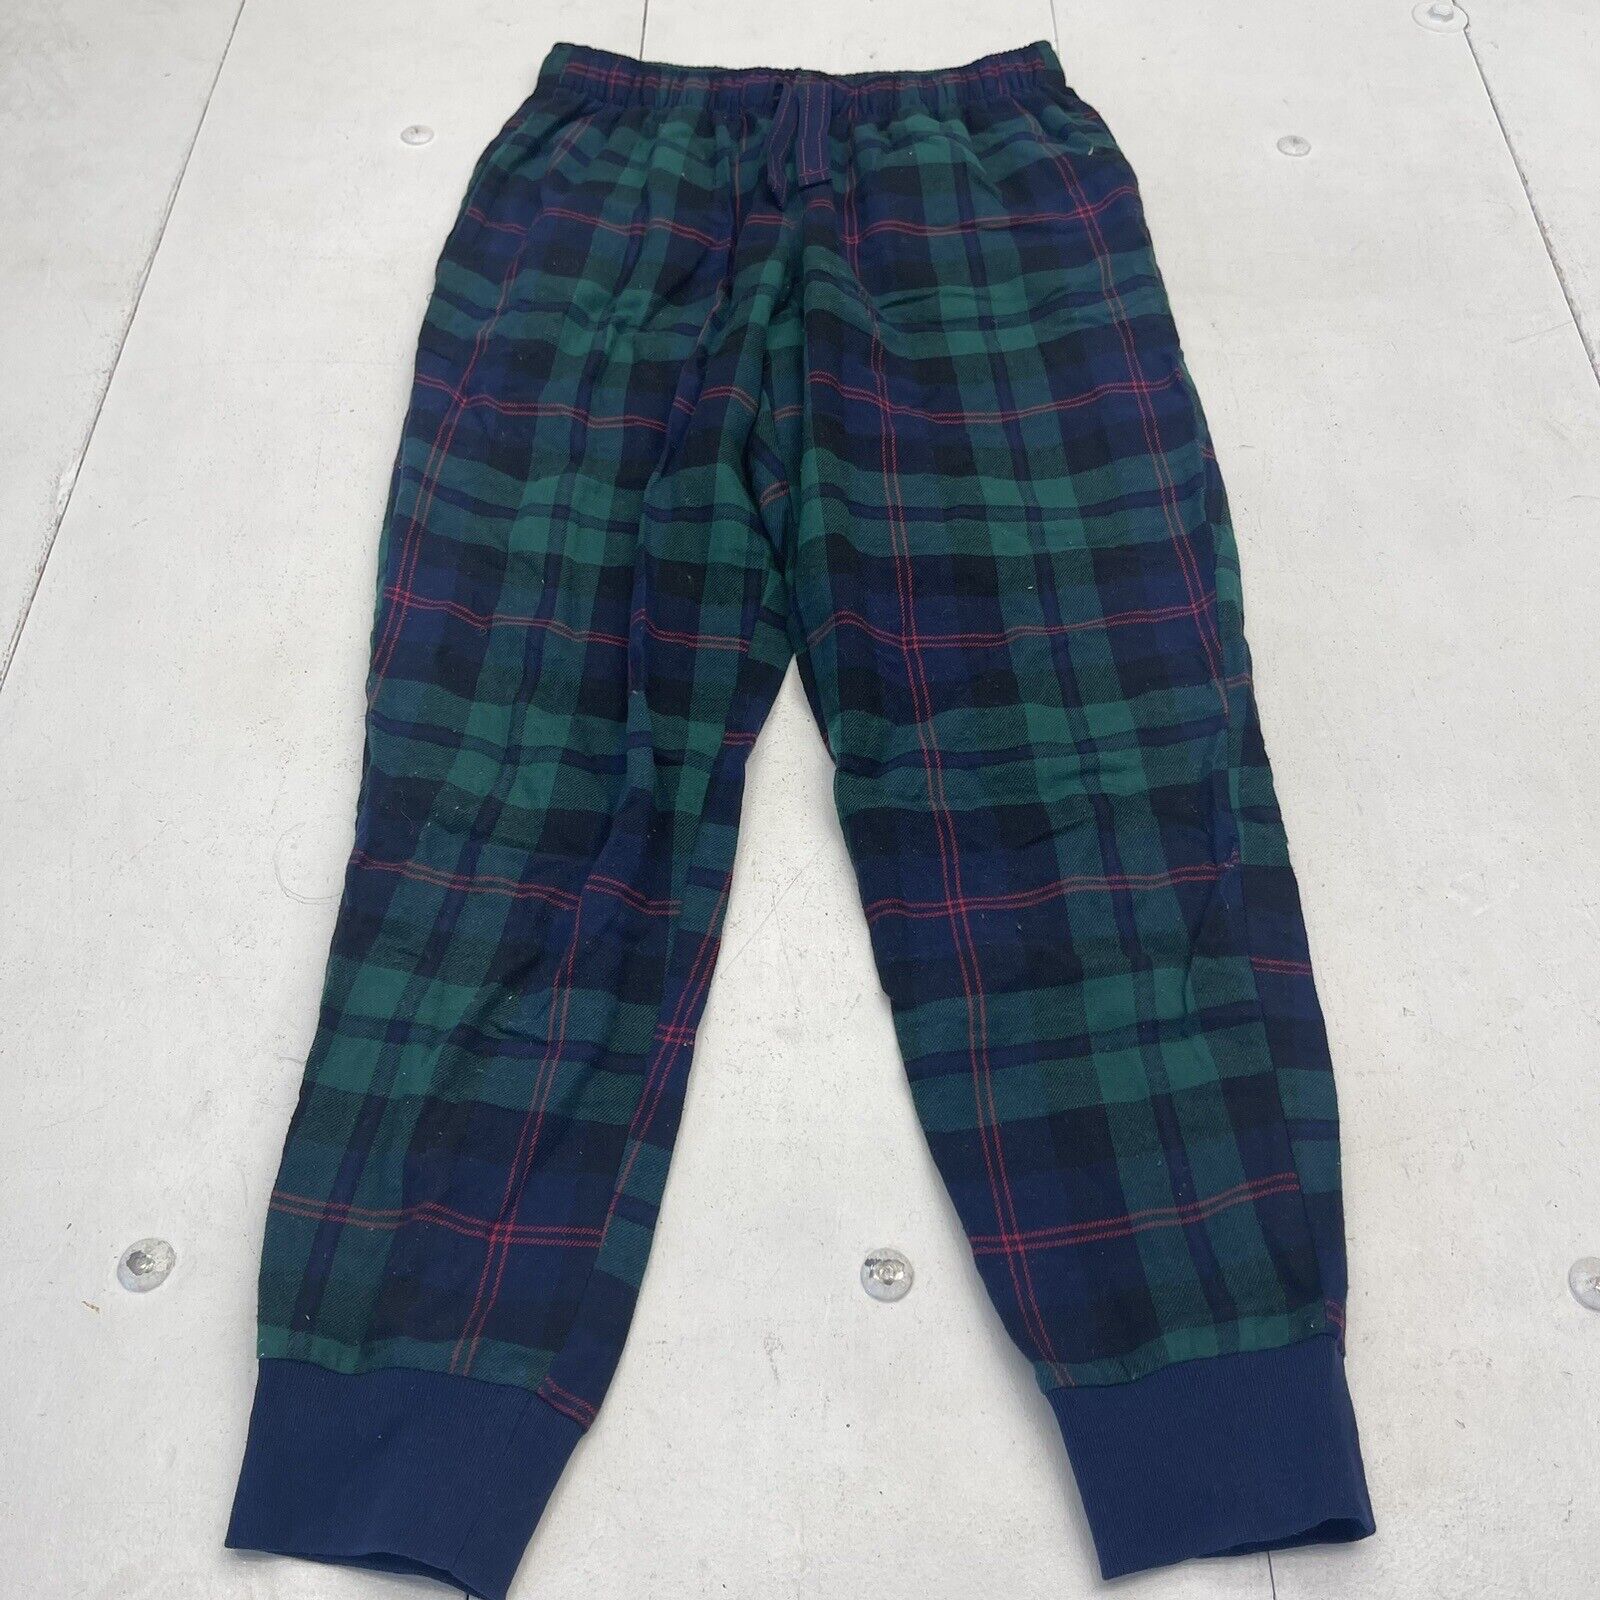 Aerie Flannel Jogger Pajama Pant